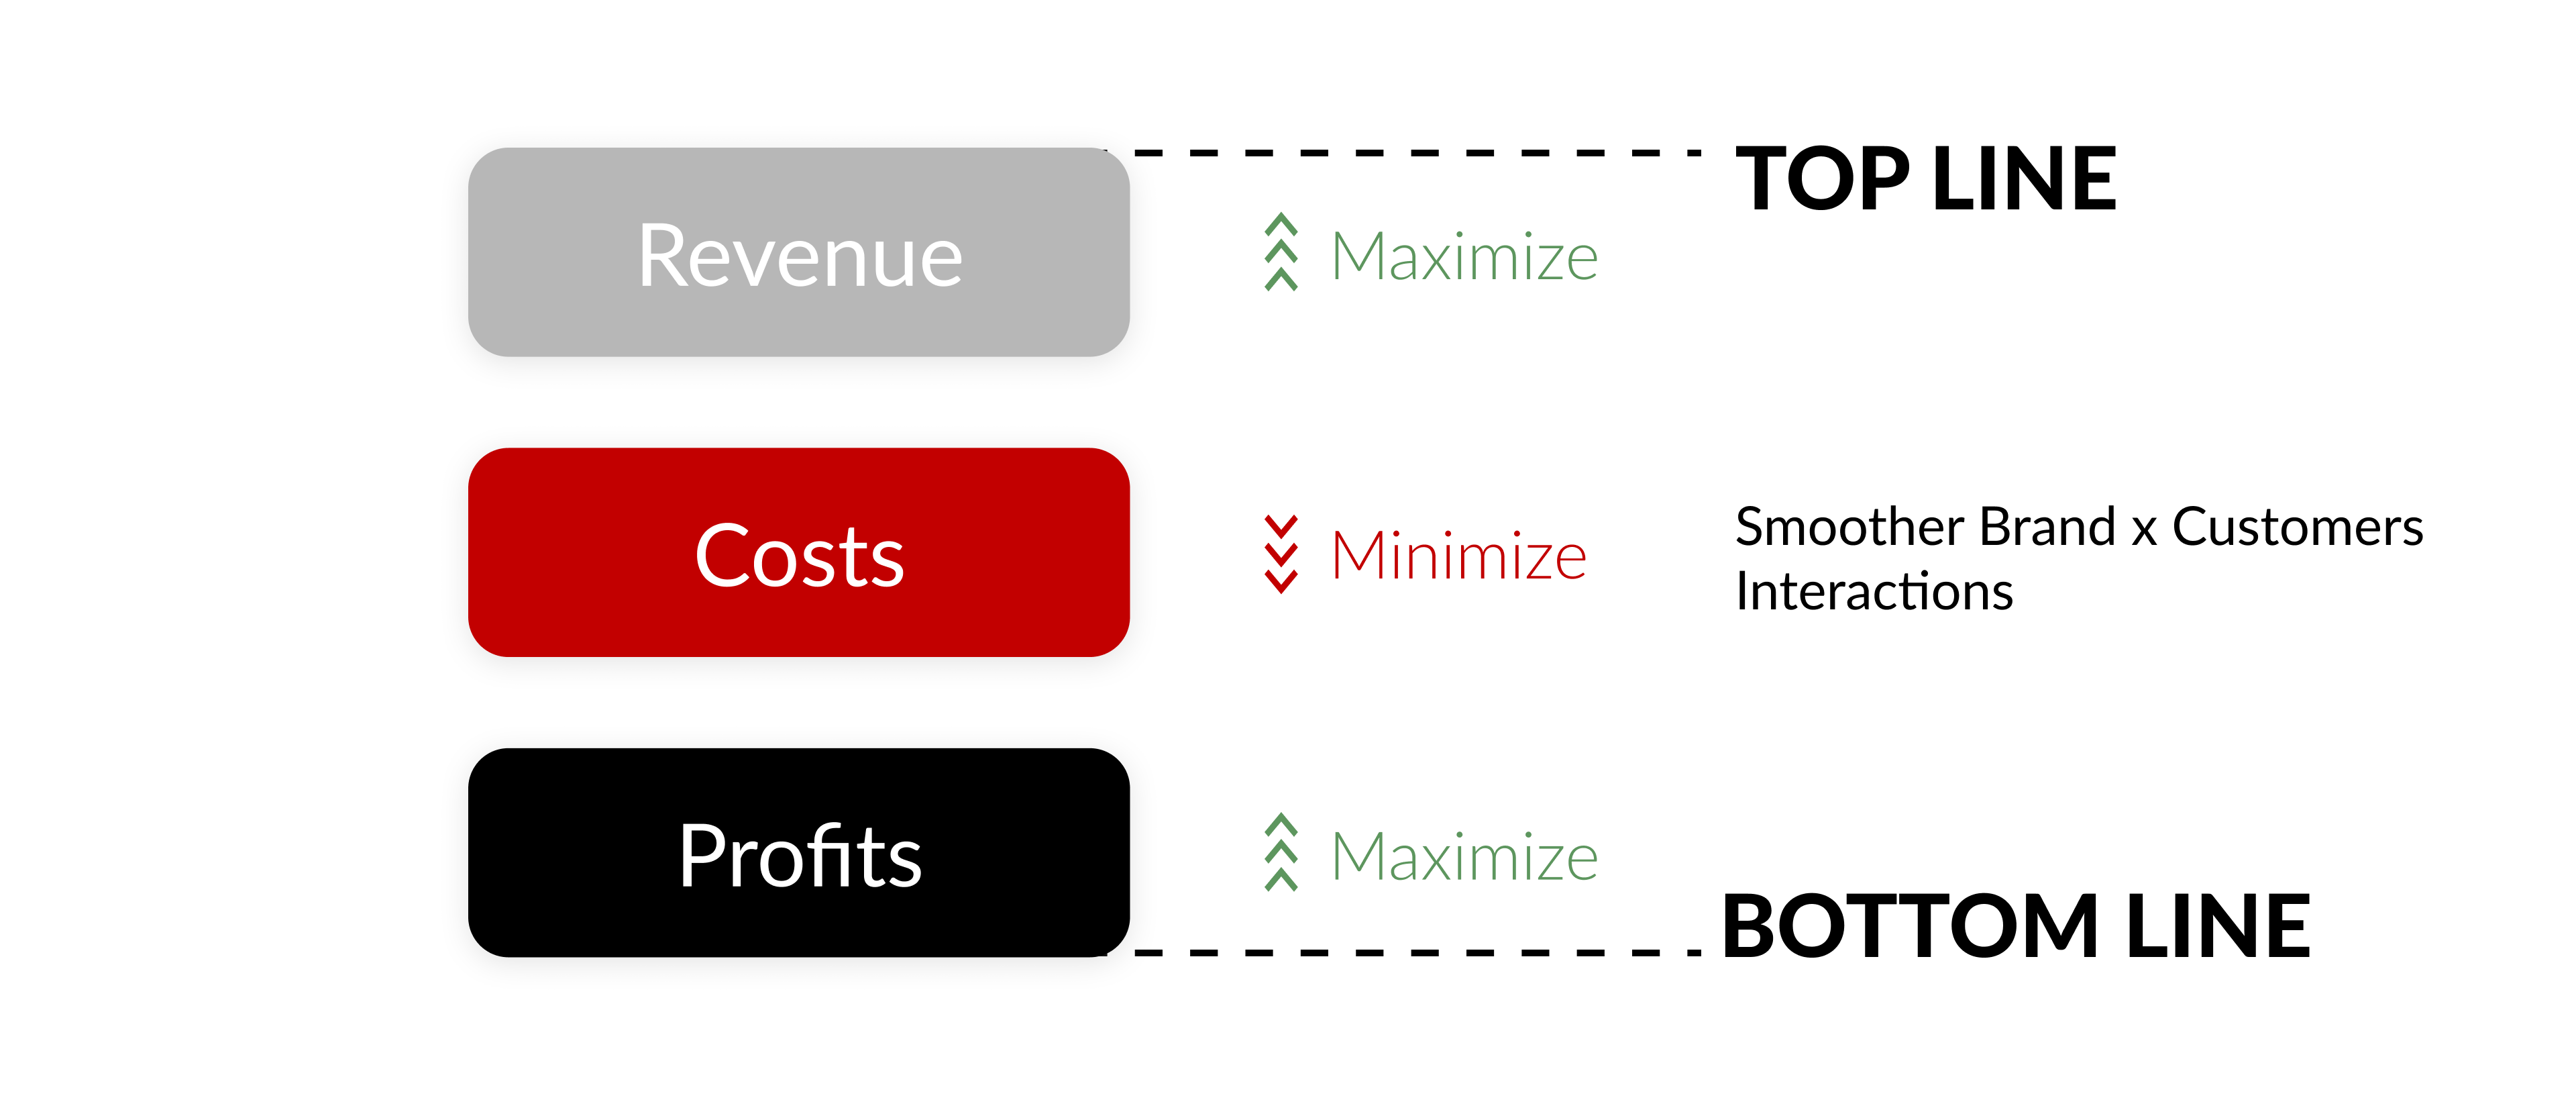 Maximize both your top line and bottom line by maximizing revenue and profits while minimizing costs with smoother brand and customers interactions